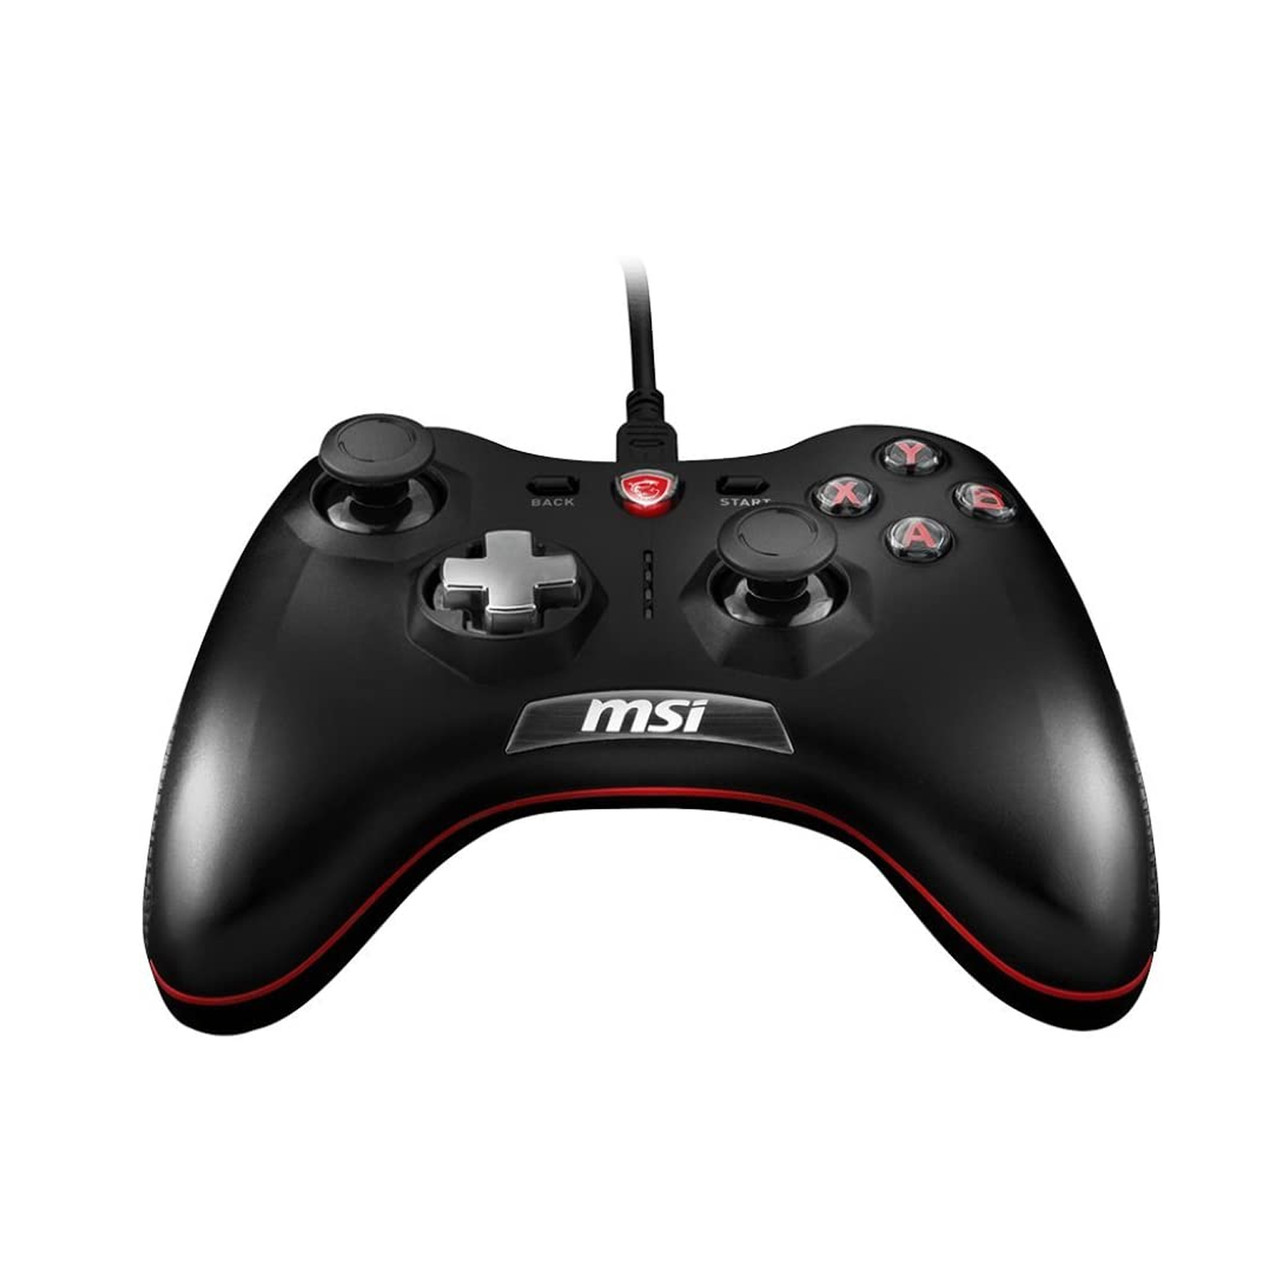 MSI Force GC20 USB Wired Controller Gamepad for Windows PC Android PS3 Stream